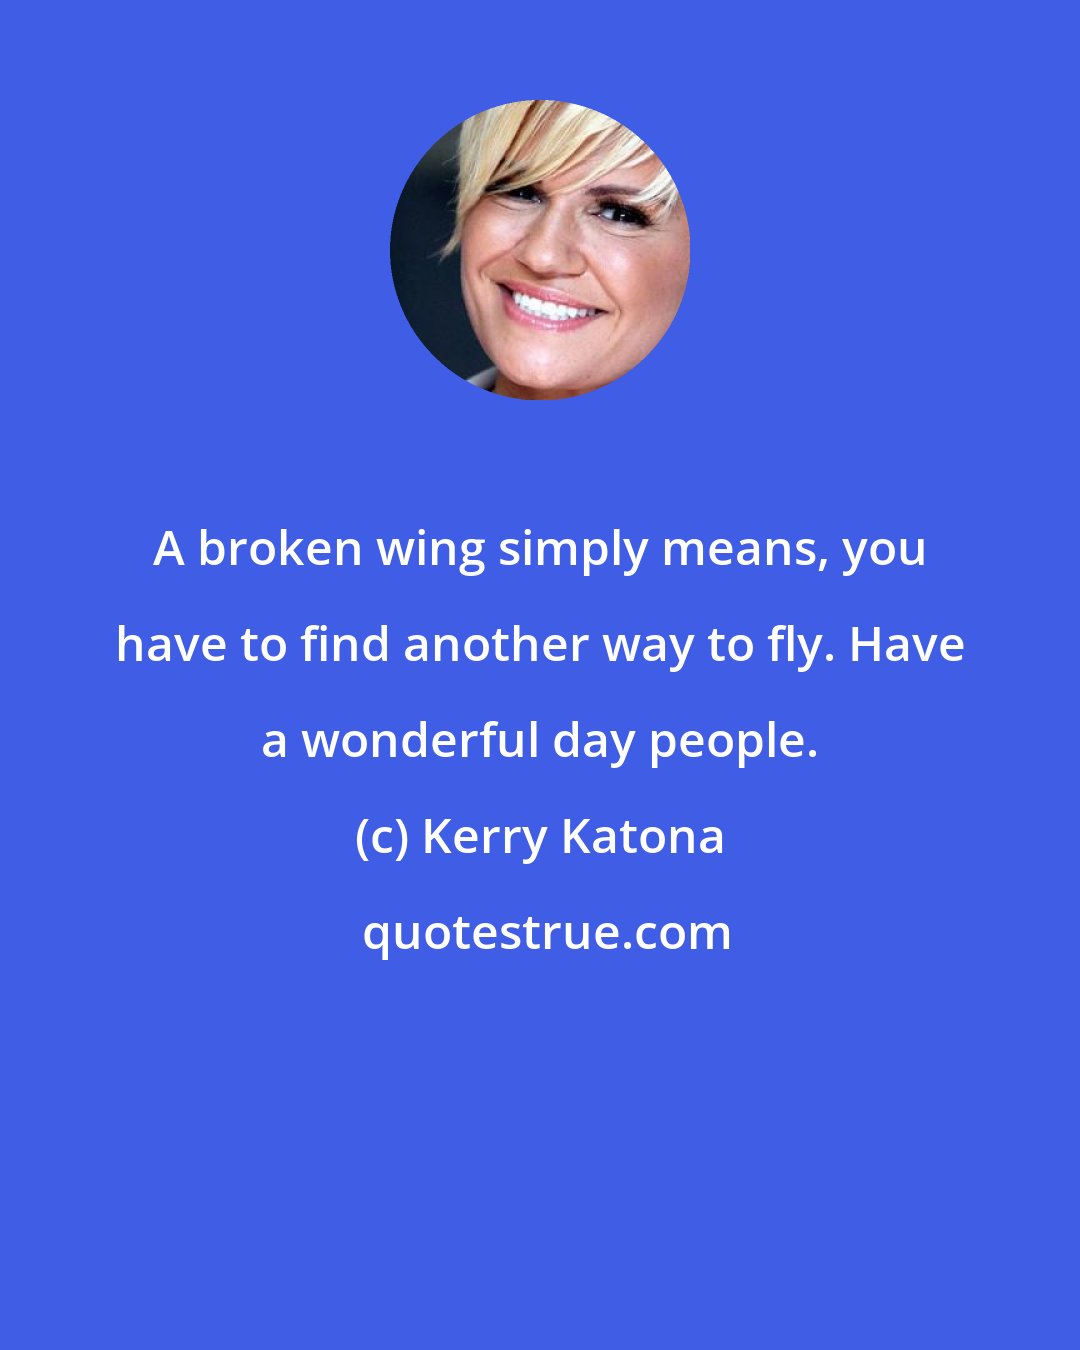 Kerry Katona: A broken wing simply means, you have to find another way to fly. Have a wonderful day people.